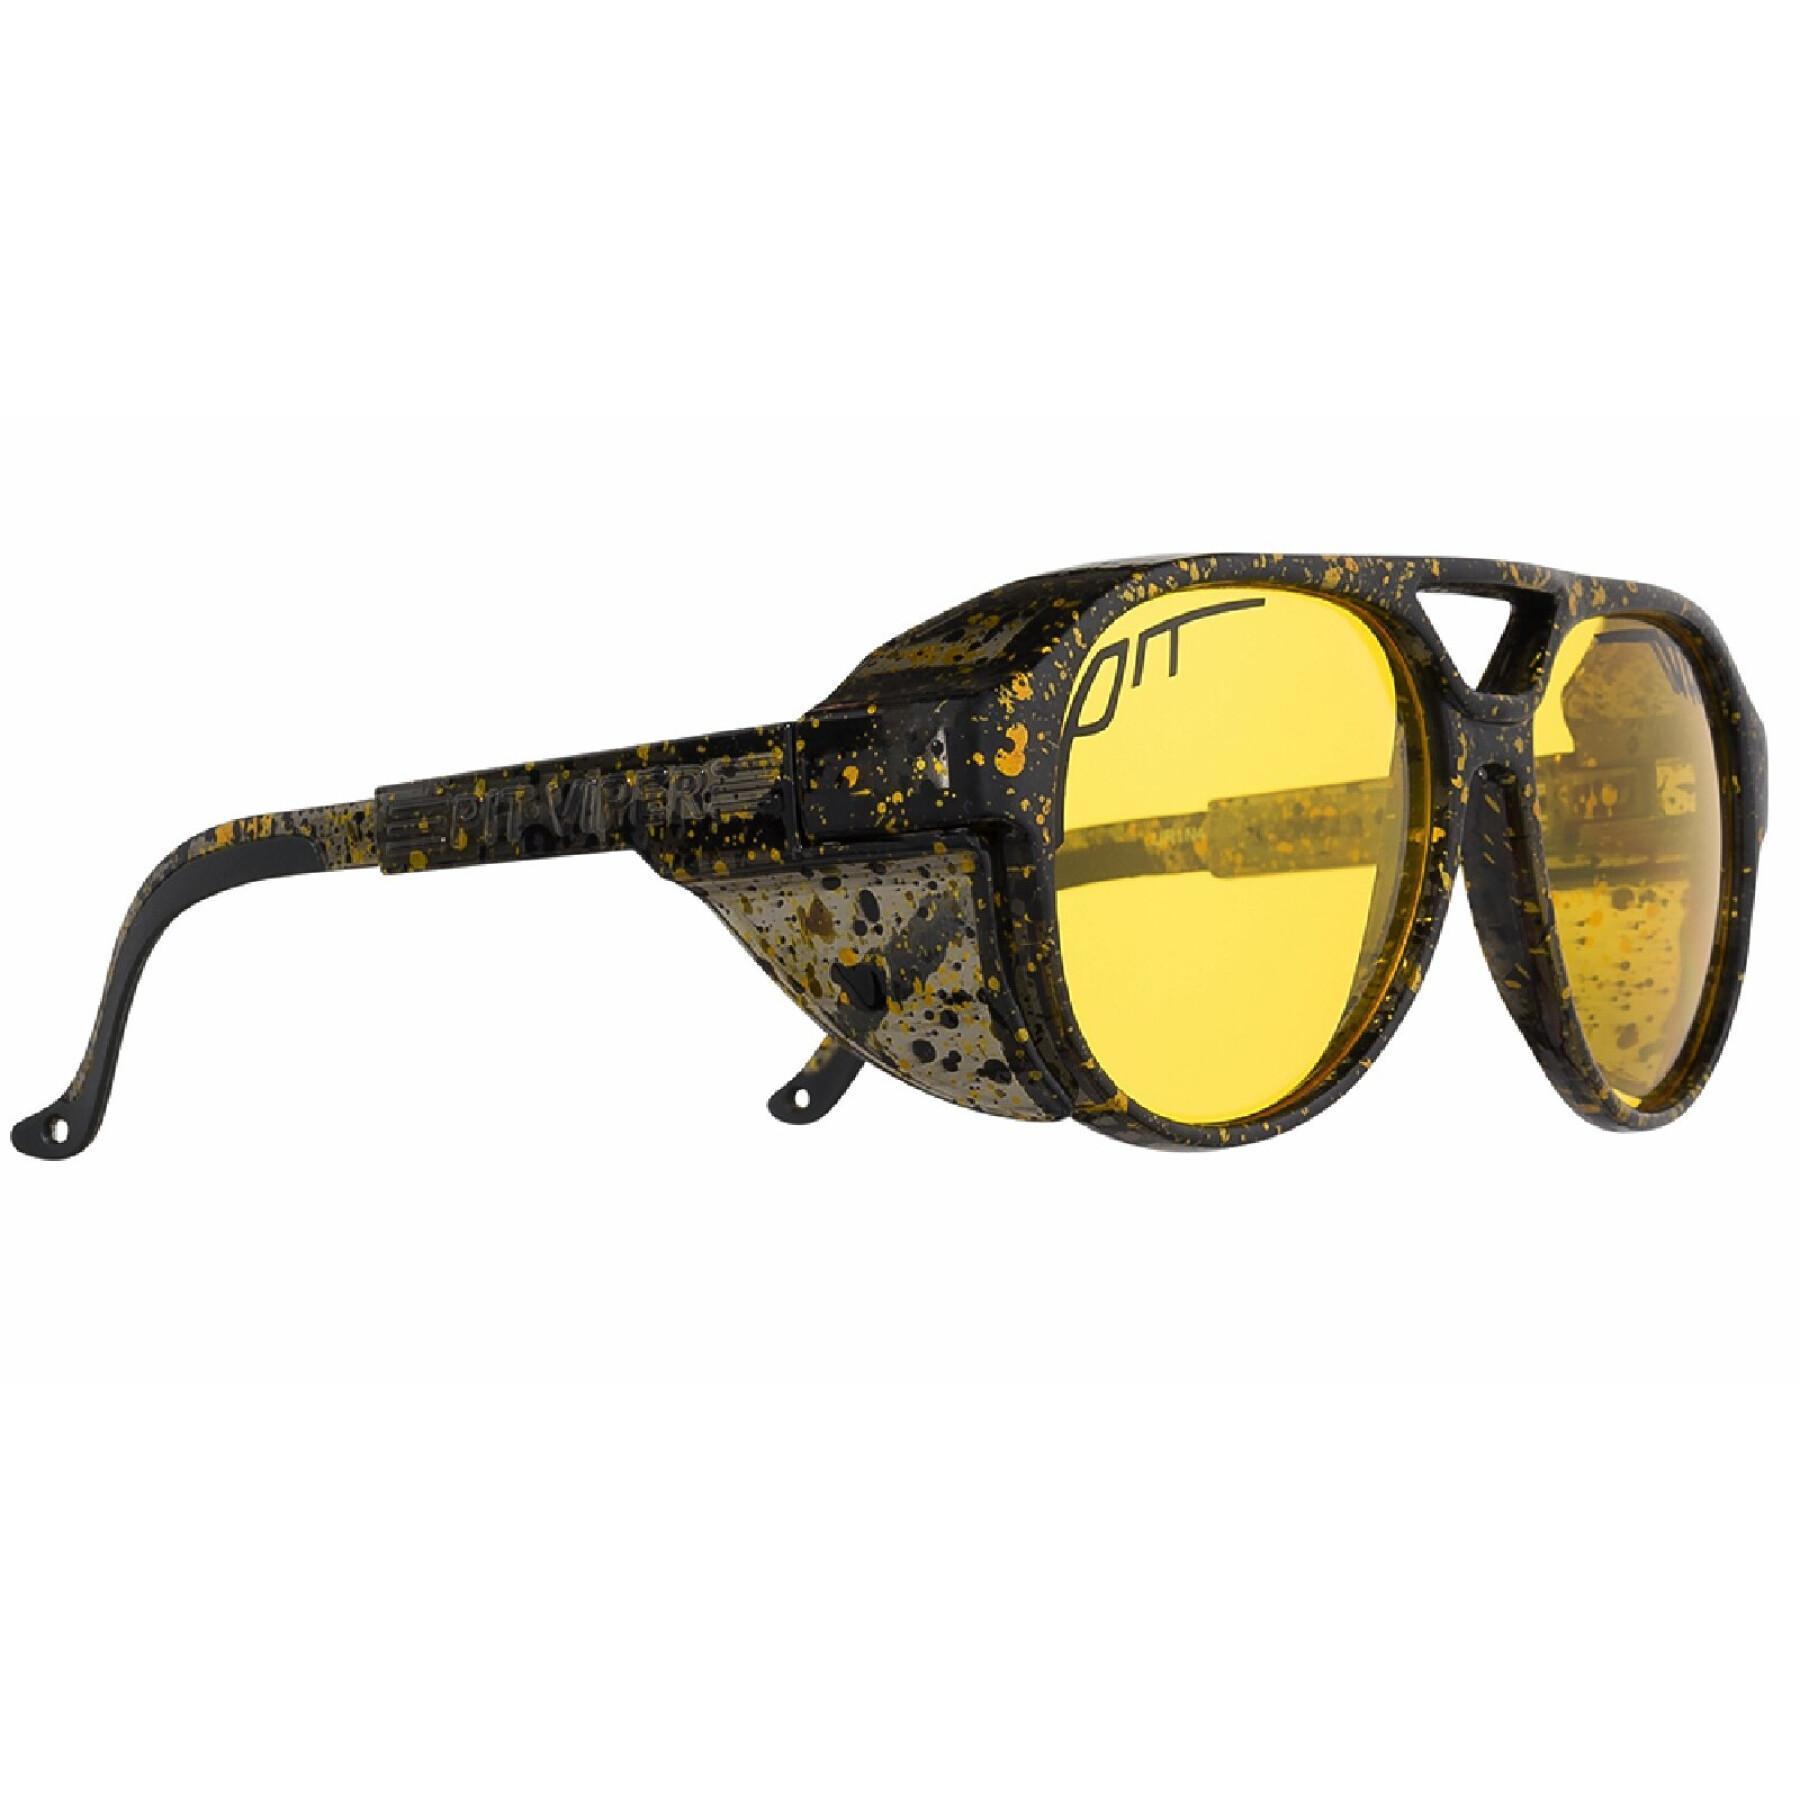 Sunglasses Pit Viper The Crossfire Exciters